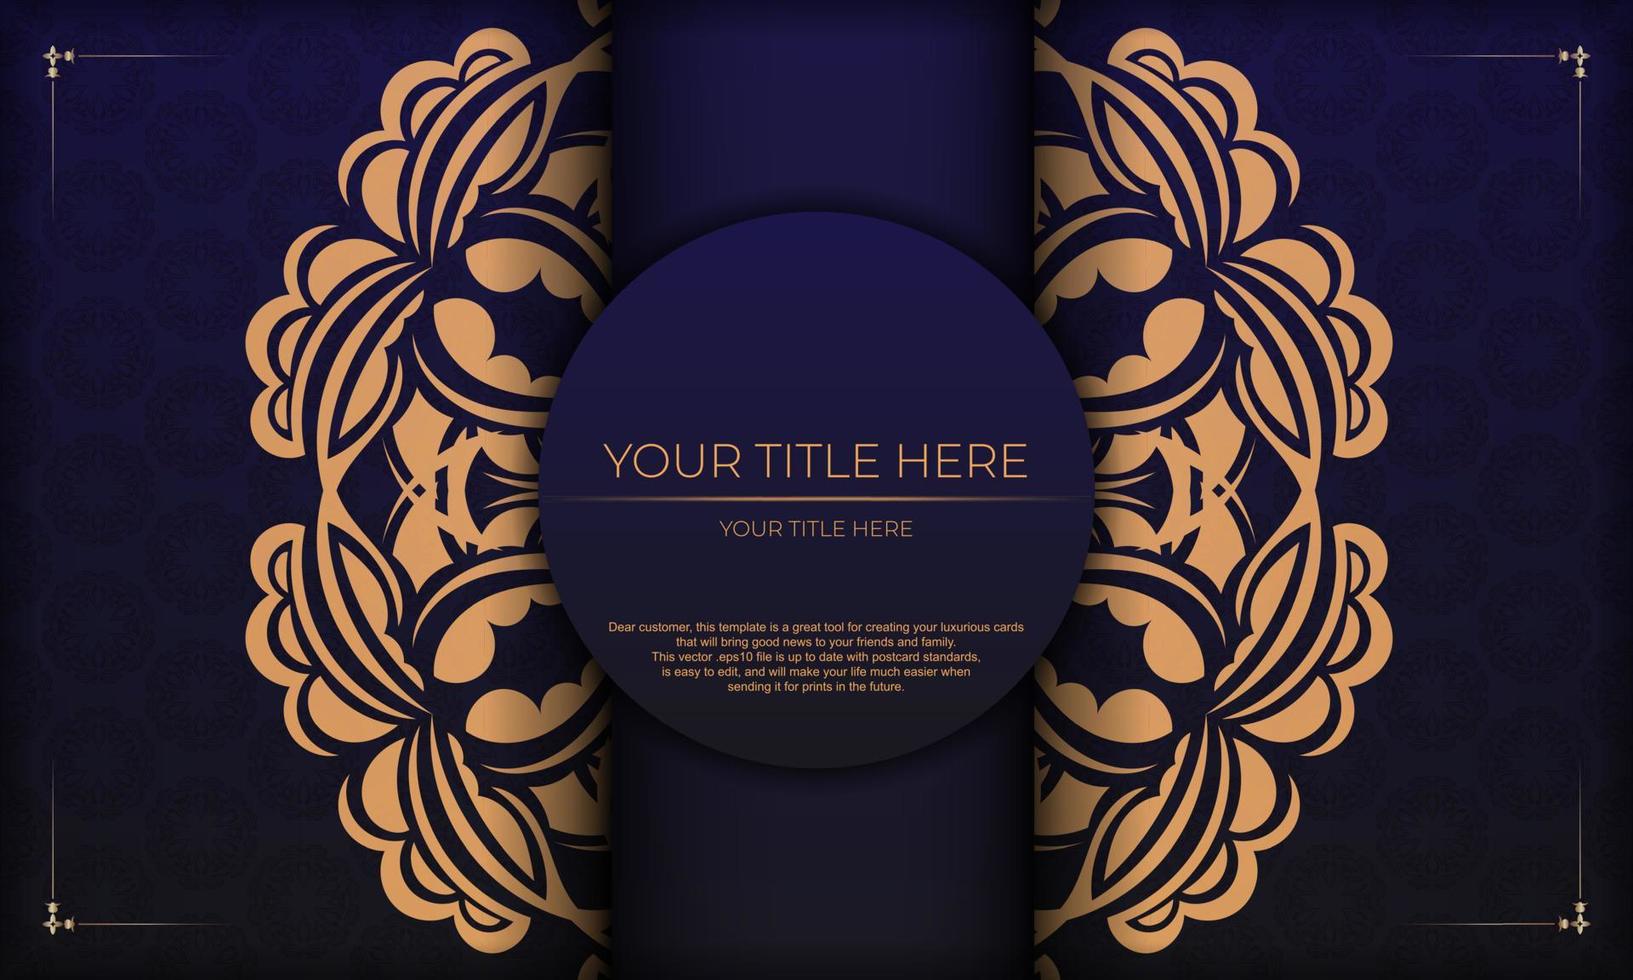 Template for design printable invitation card with luxurious patterns. Purple vector banner with greek luxury ornaments and place for your text.